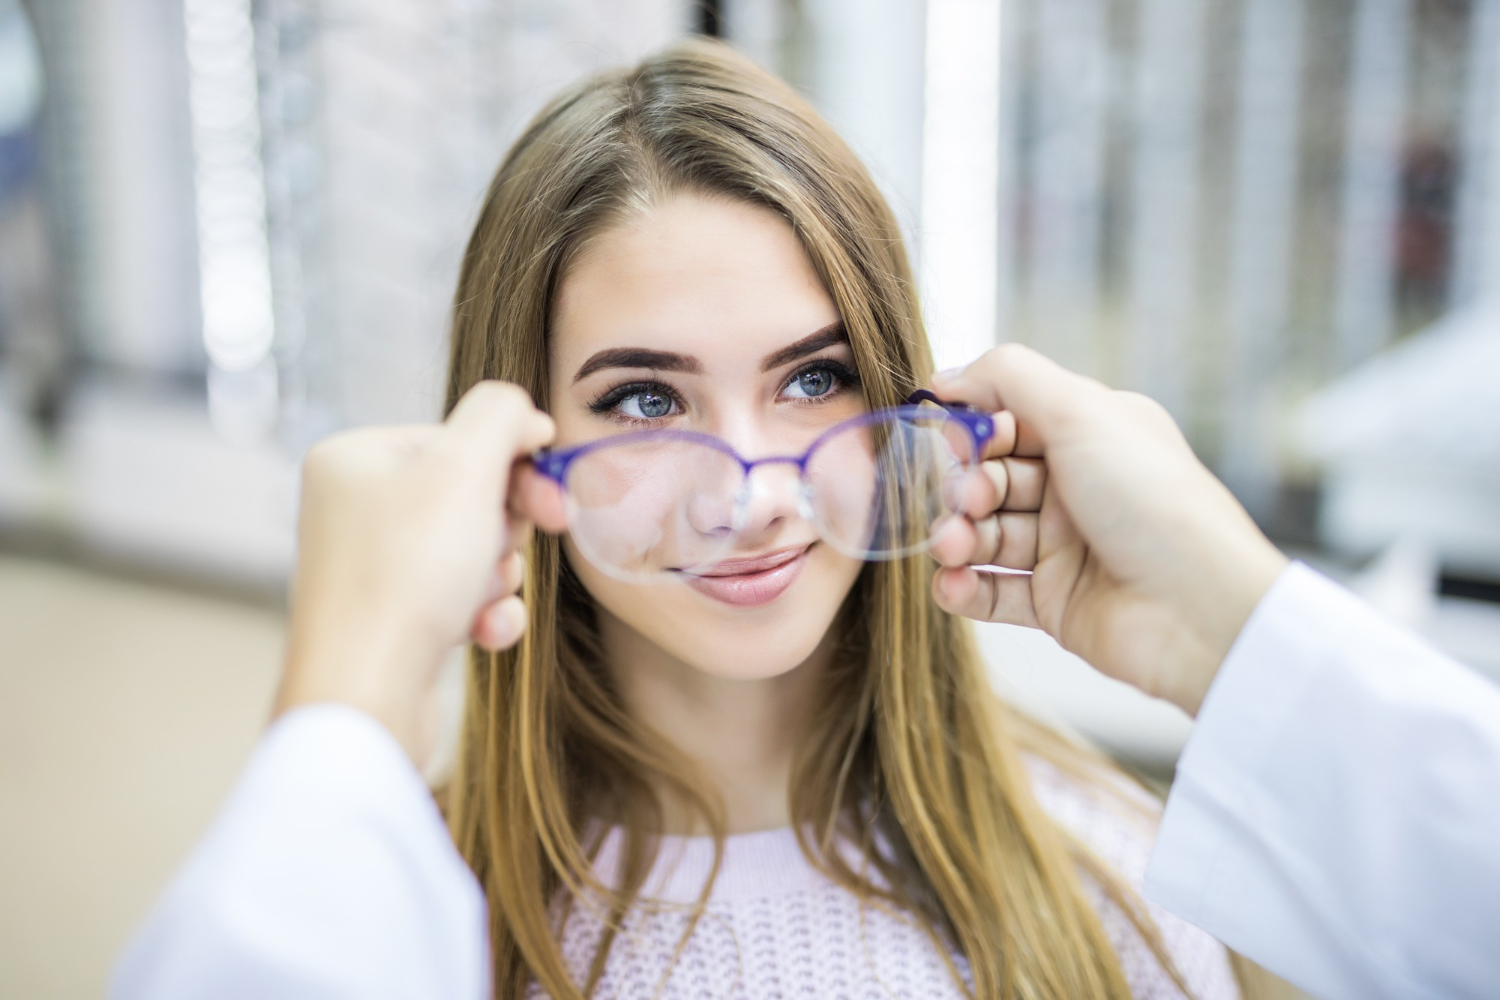 The Relationship Between Eyeglass Materials and Eye Health